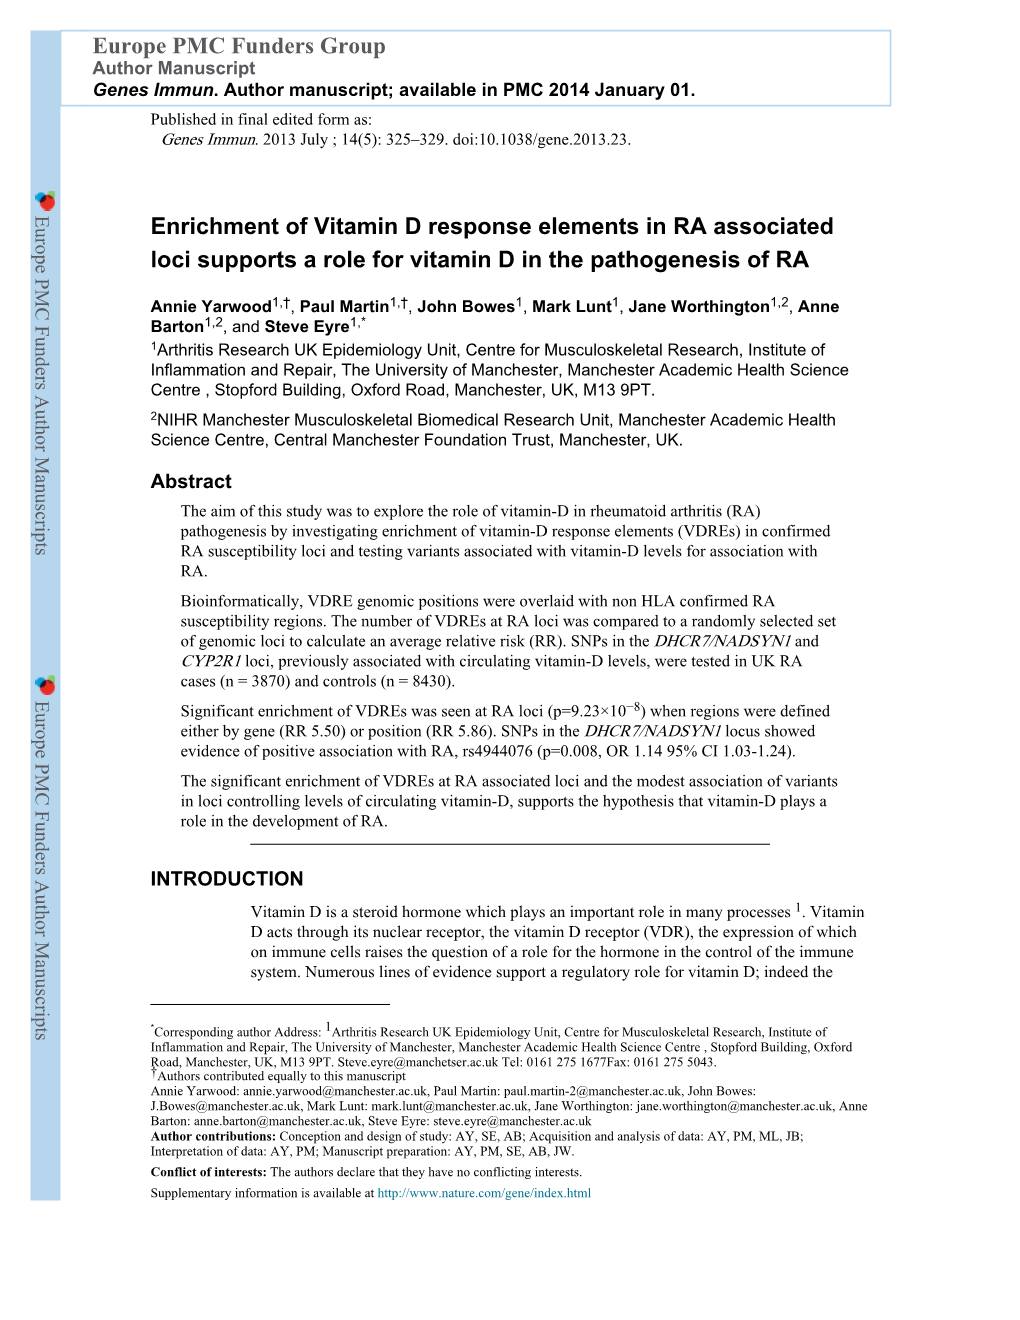 Enrichment of Vitamin D Response Elements in RA Associated Loci Supports a Role for Vitamin D in the Pathogenesis of RA